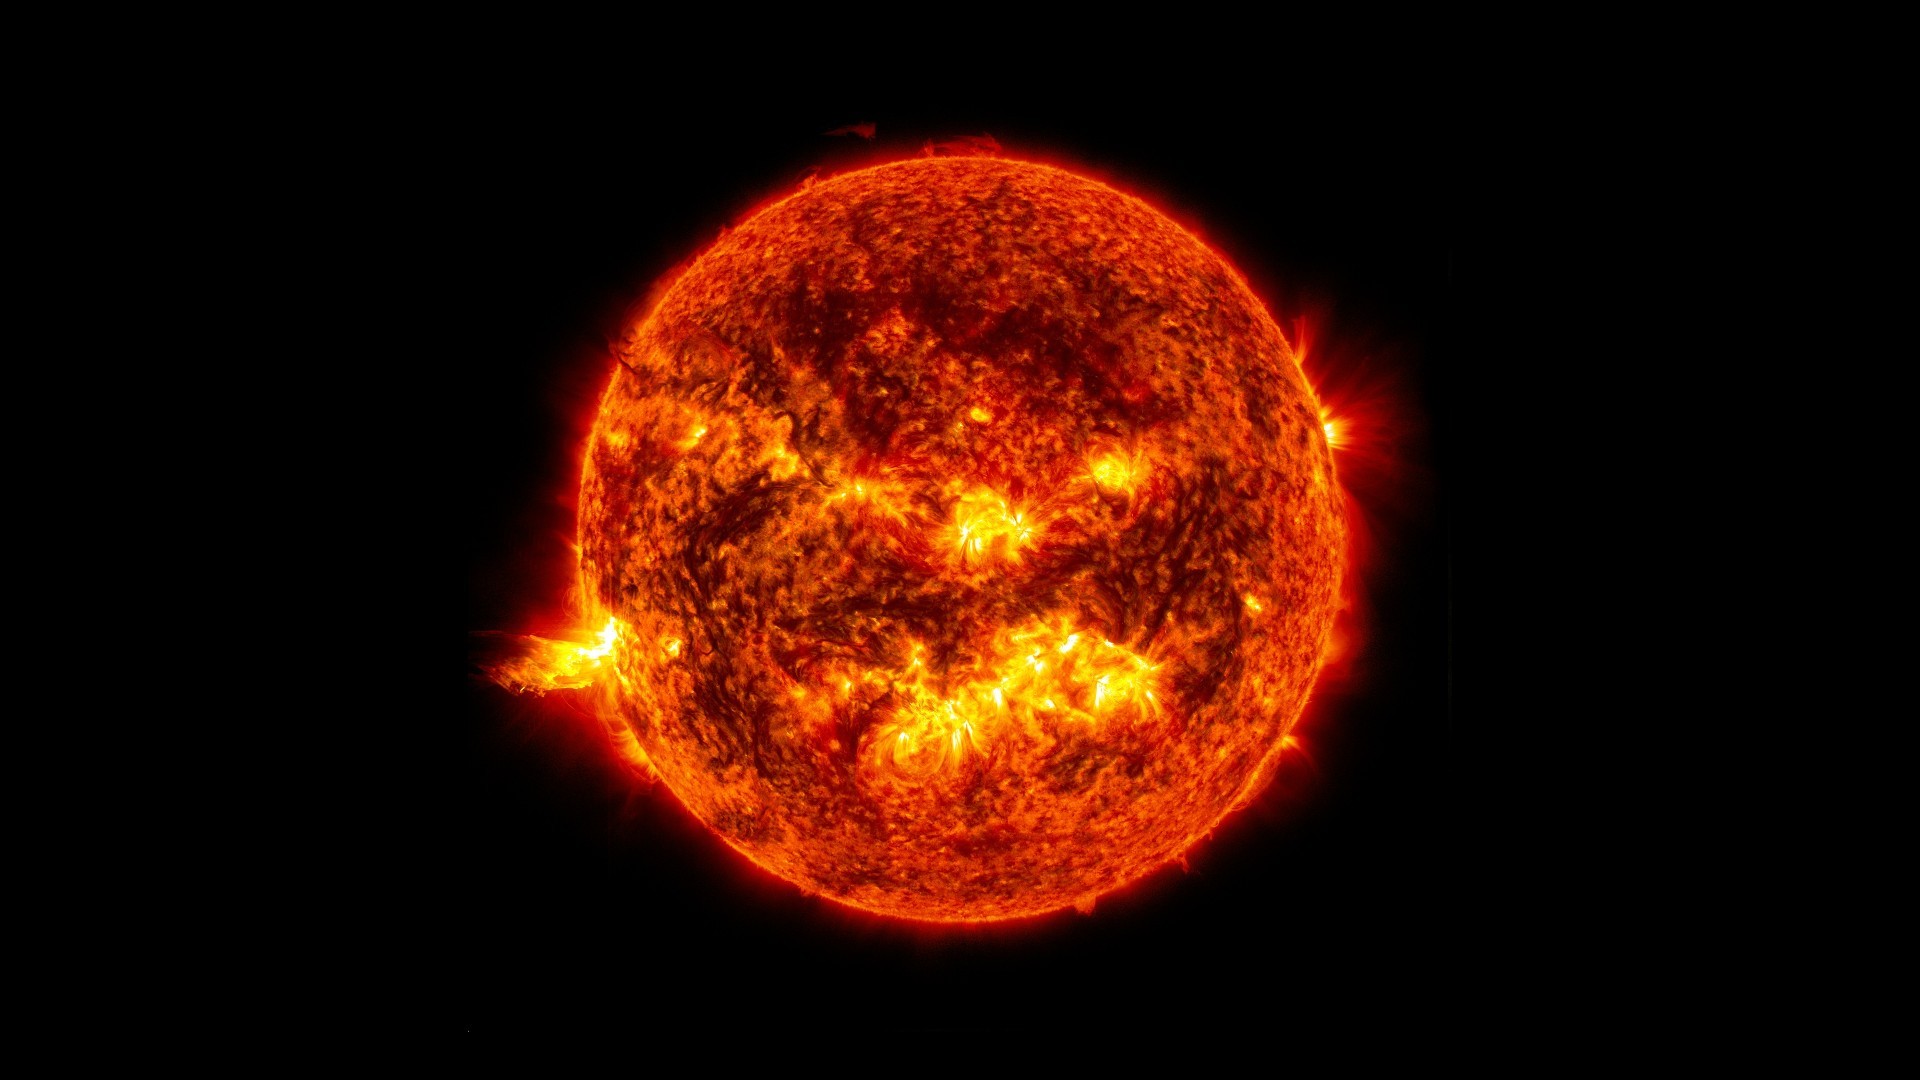 Sun emits a solstice flare. Image from June 20, 2013. Source: NASA/SDO